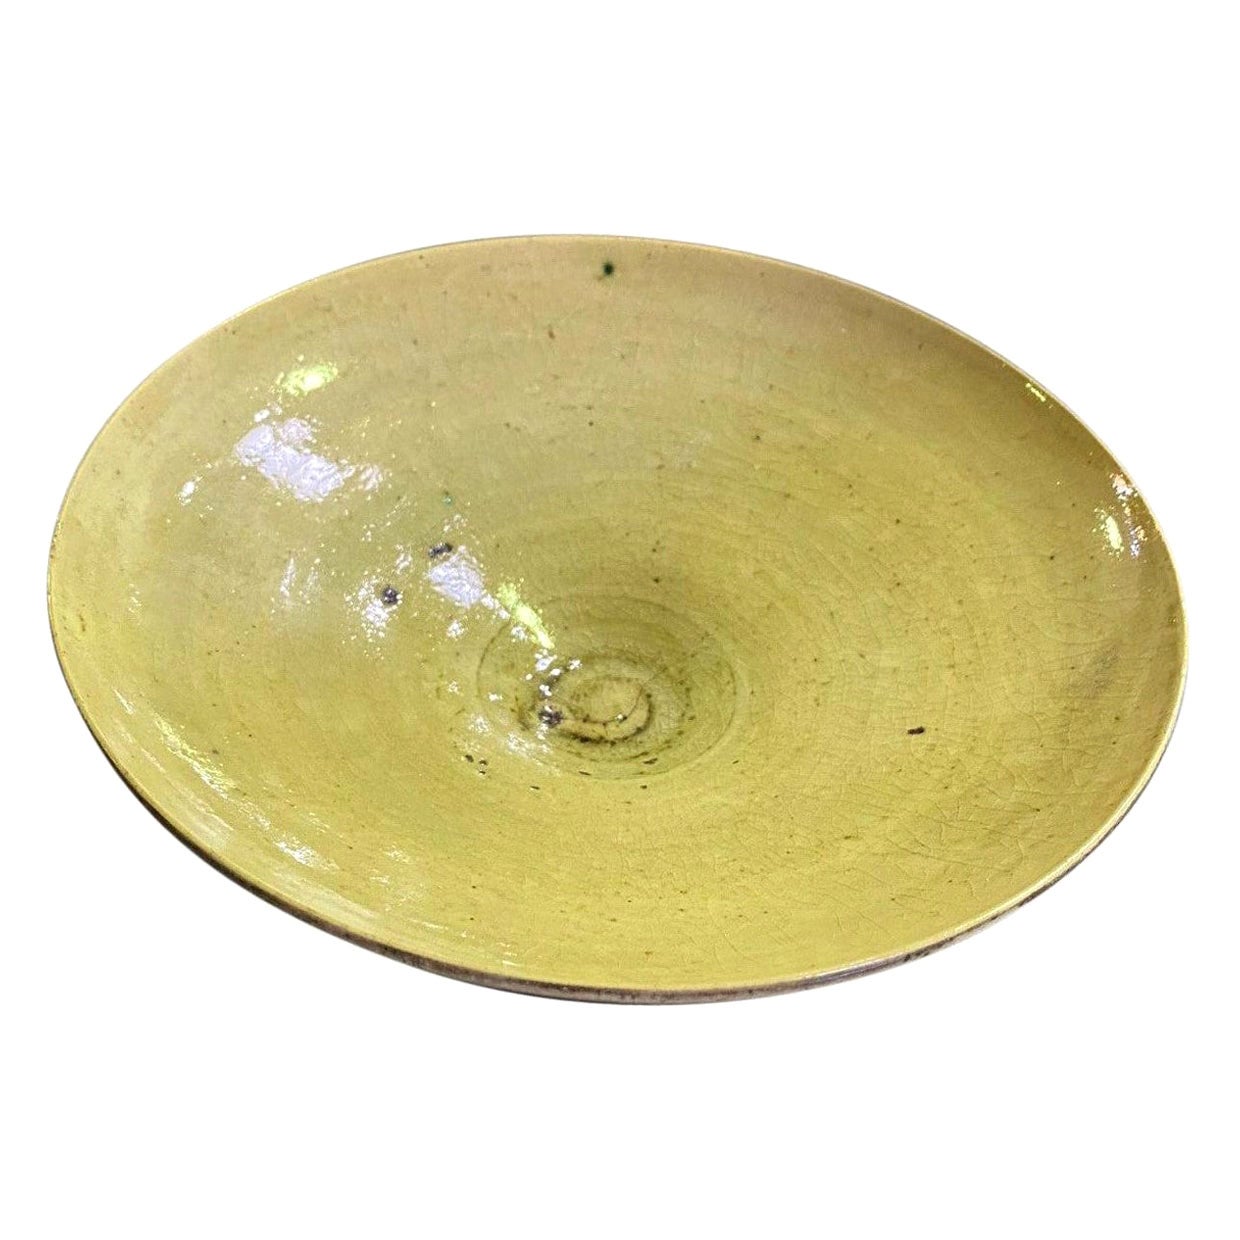 Lucie Rie Signed Stamped Yellow Speckle Glazed British Pottery Bowl, circa 1950s